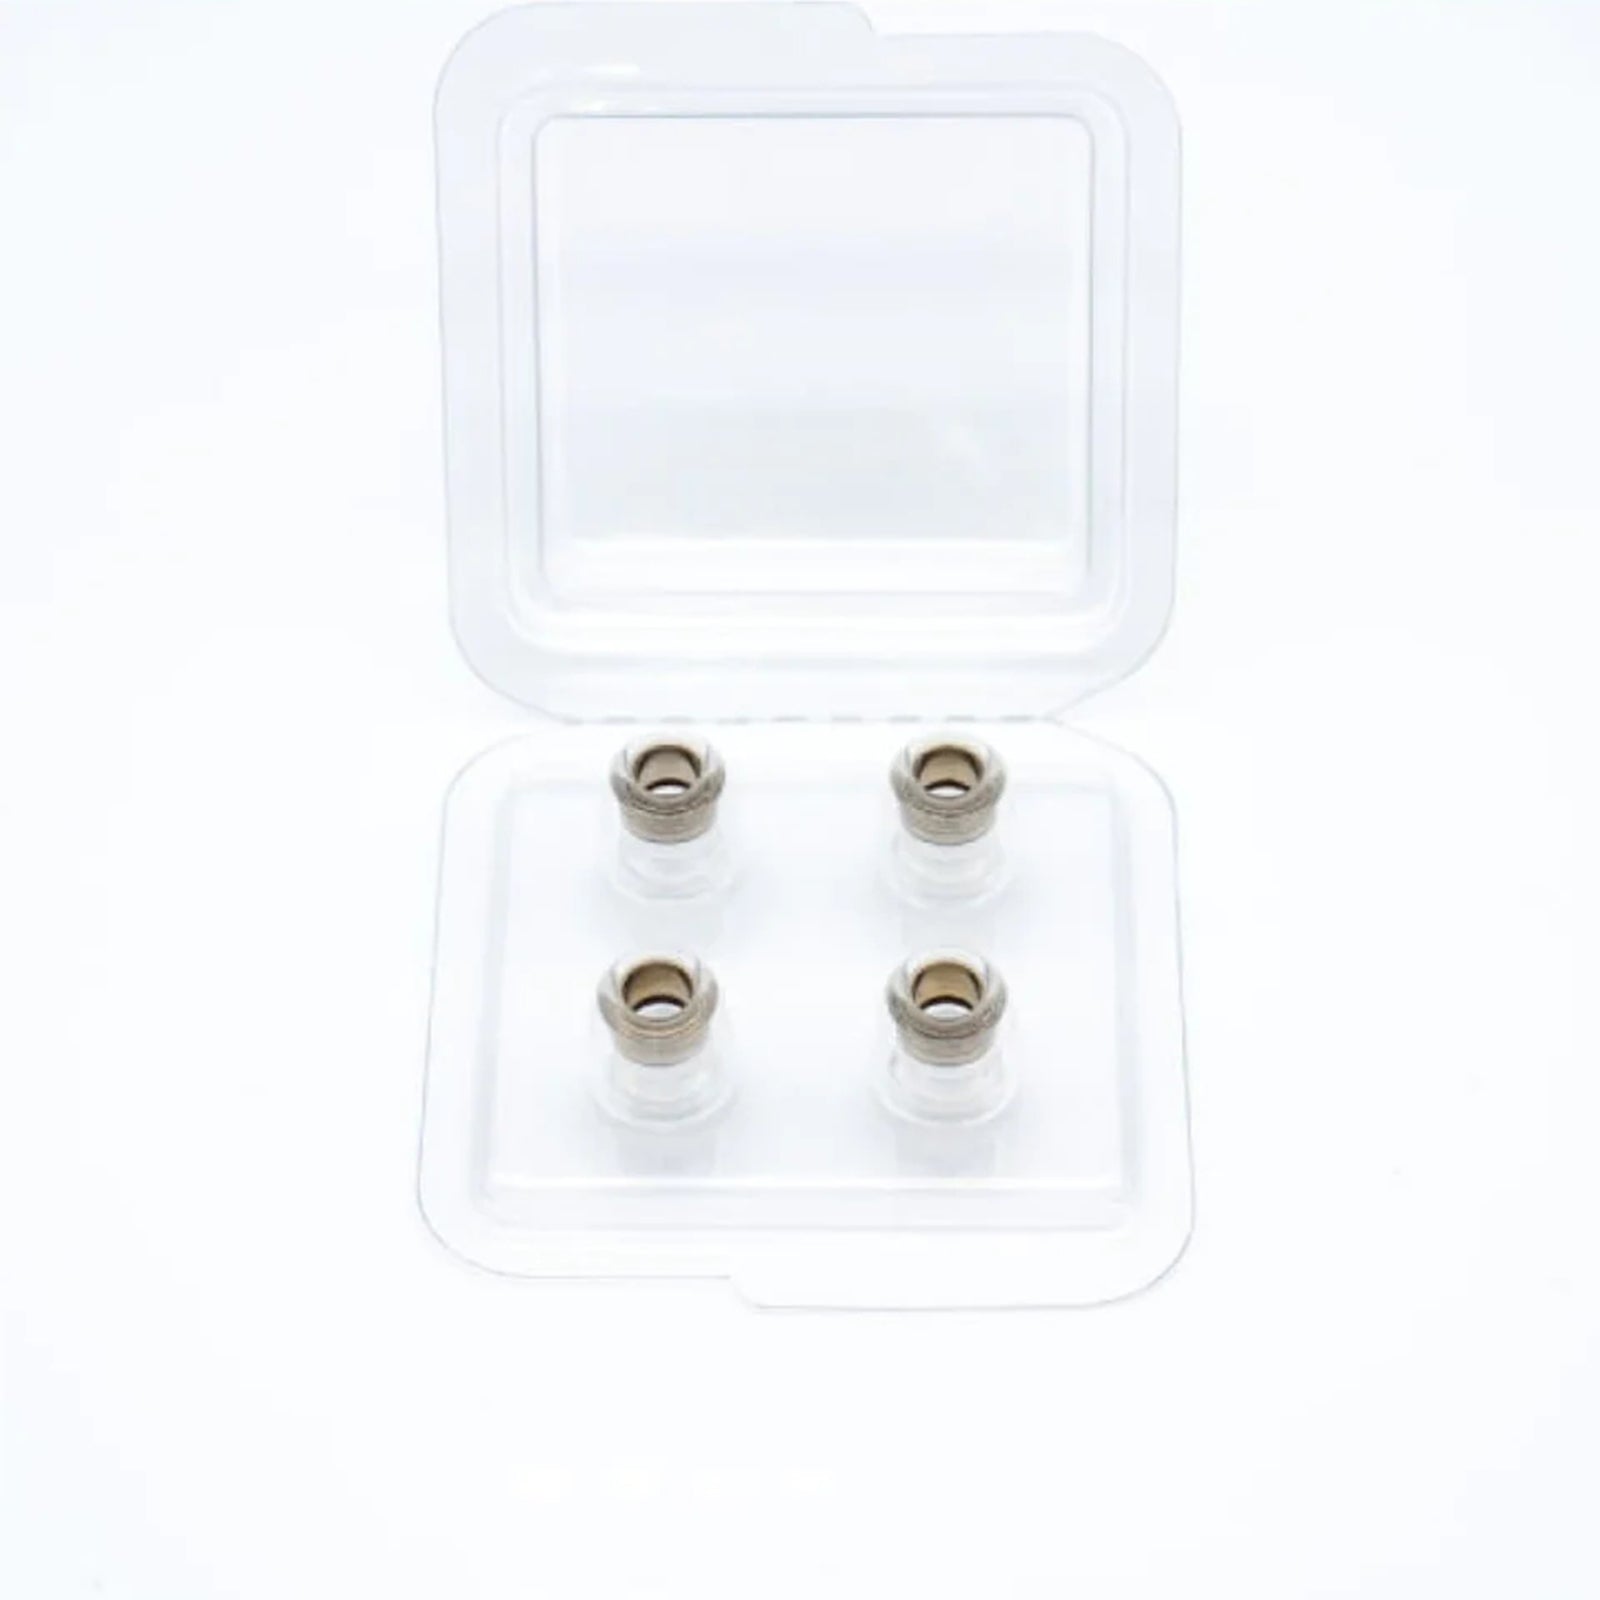  Clear Earring Backs,50 Pieces Silicone Earring